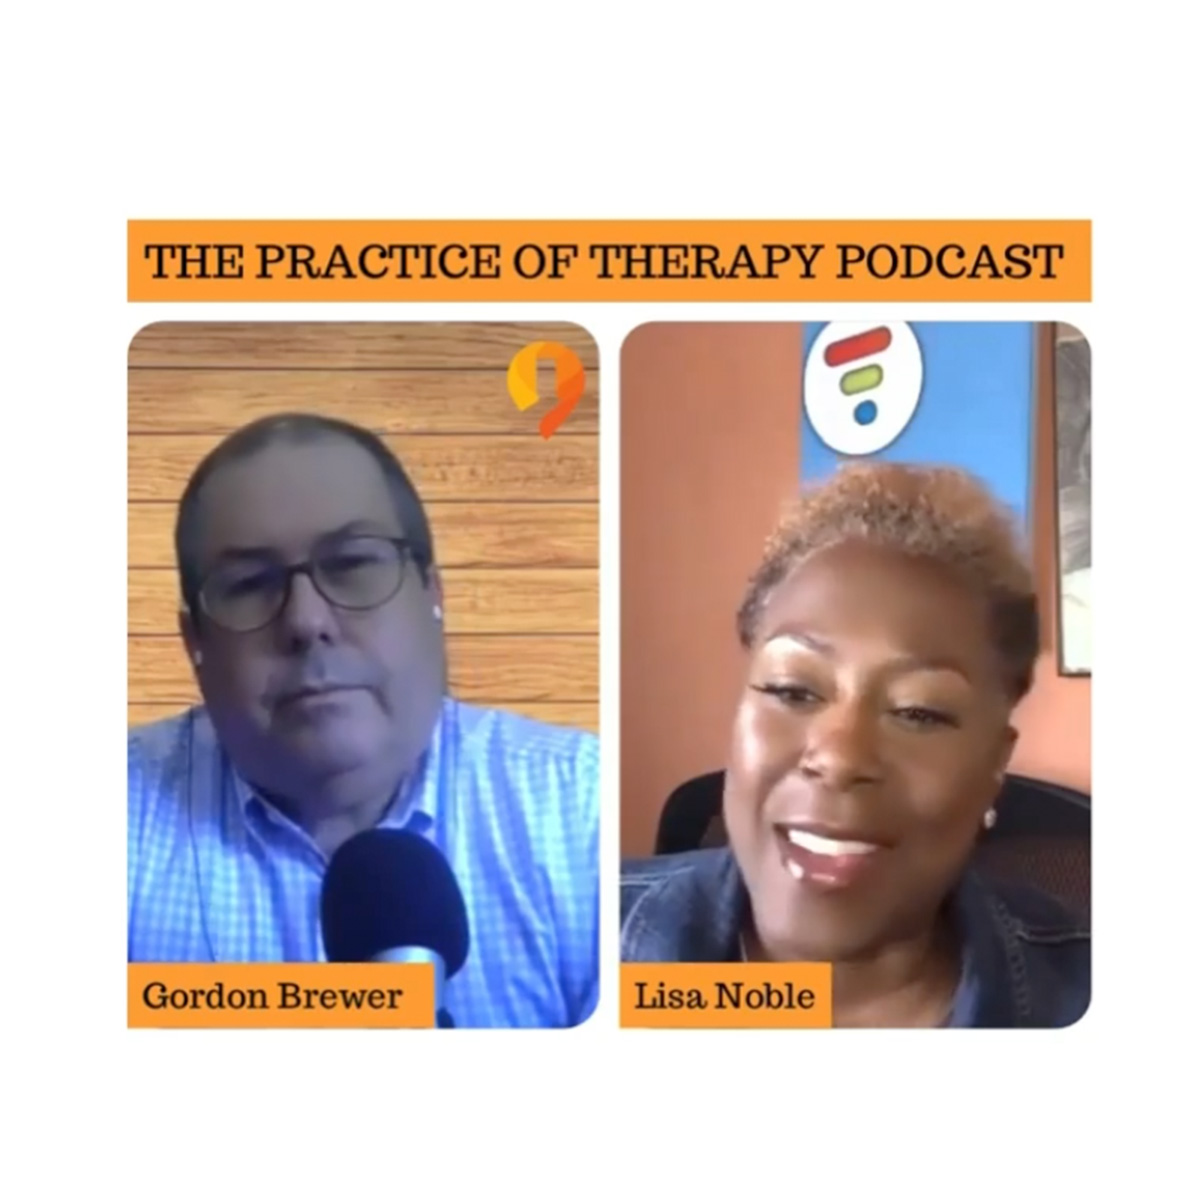 The Practice of Therapy podcast